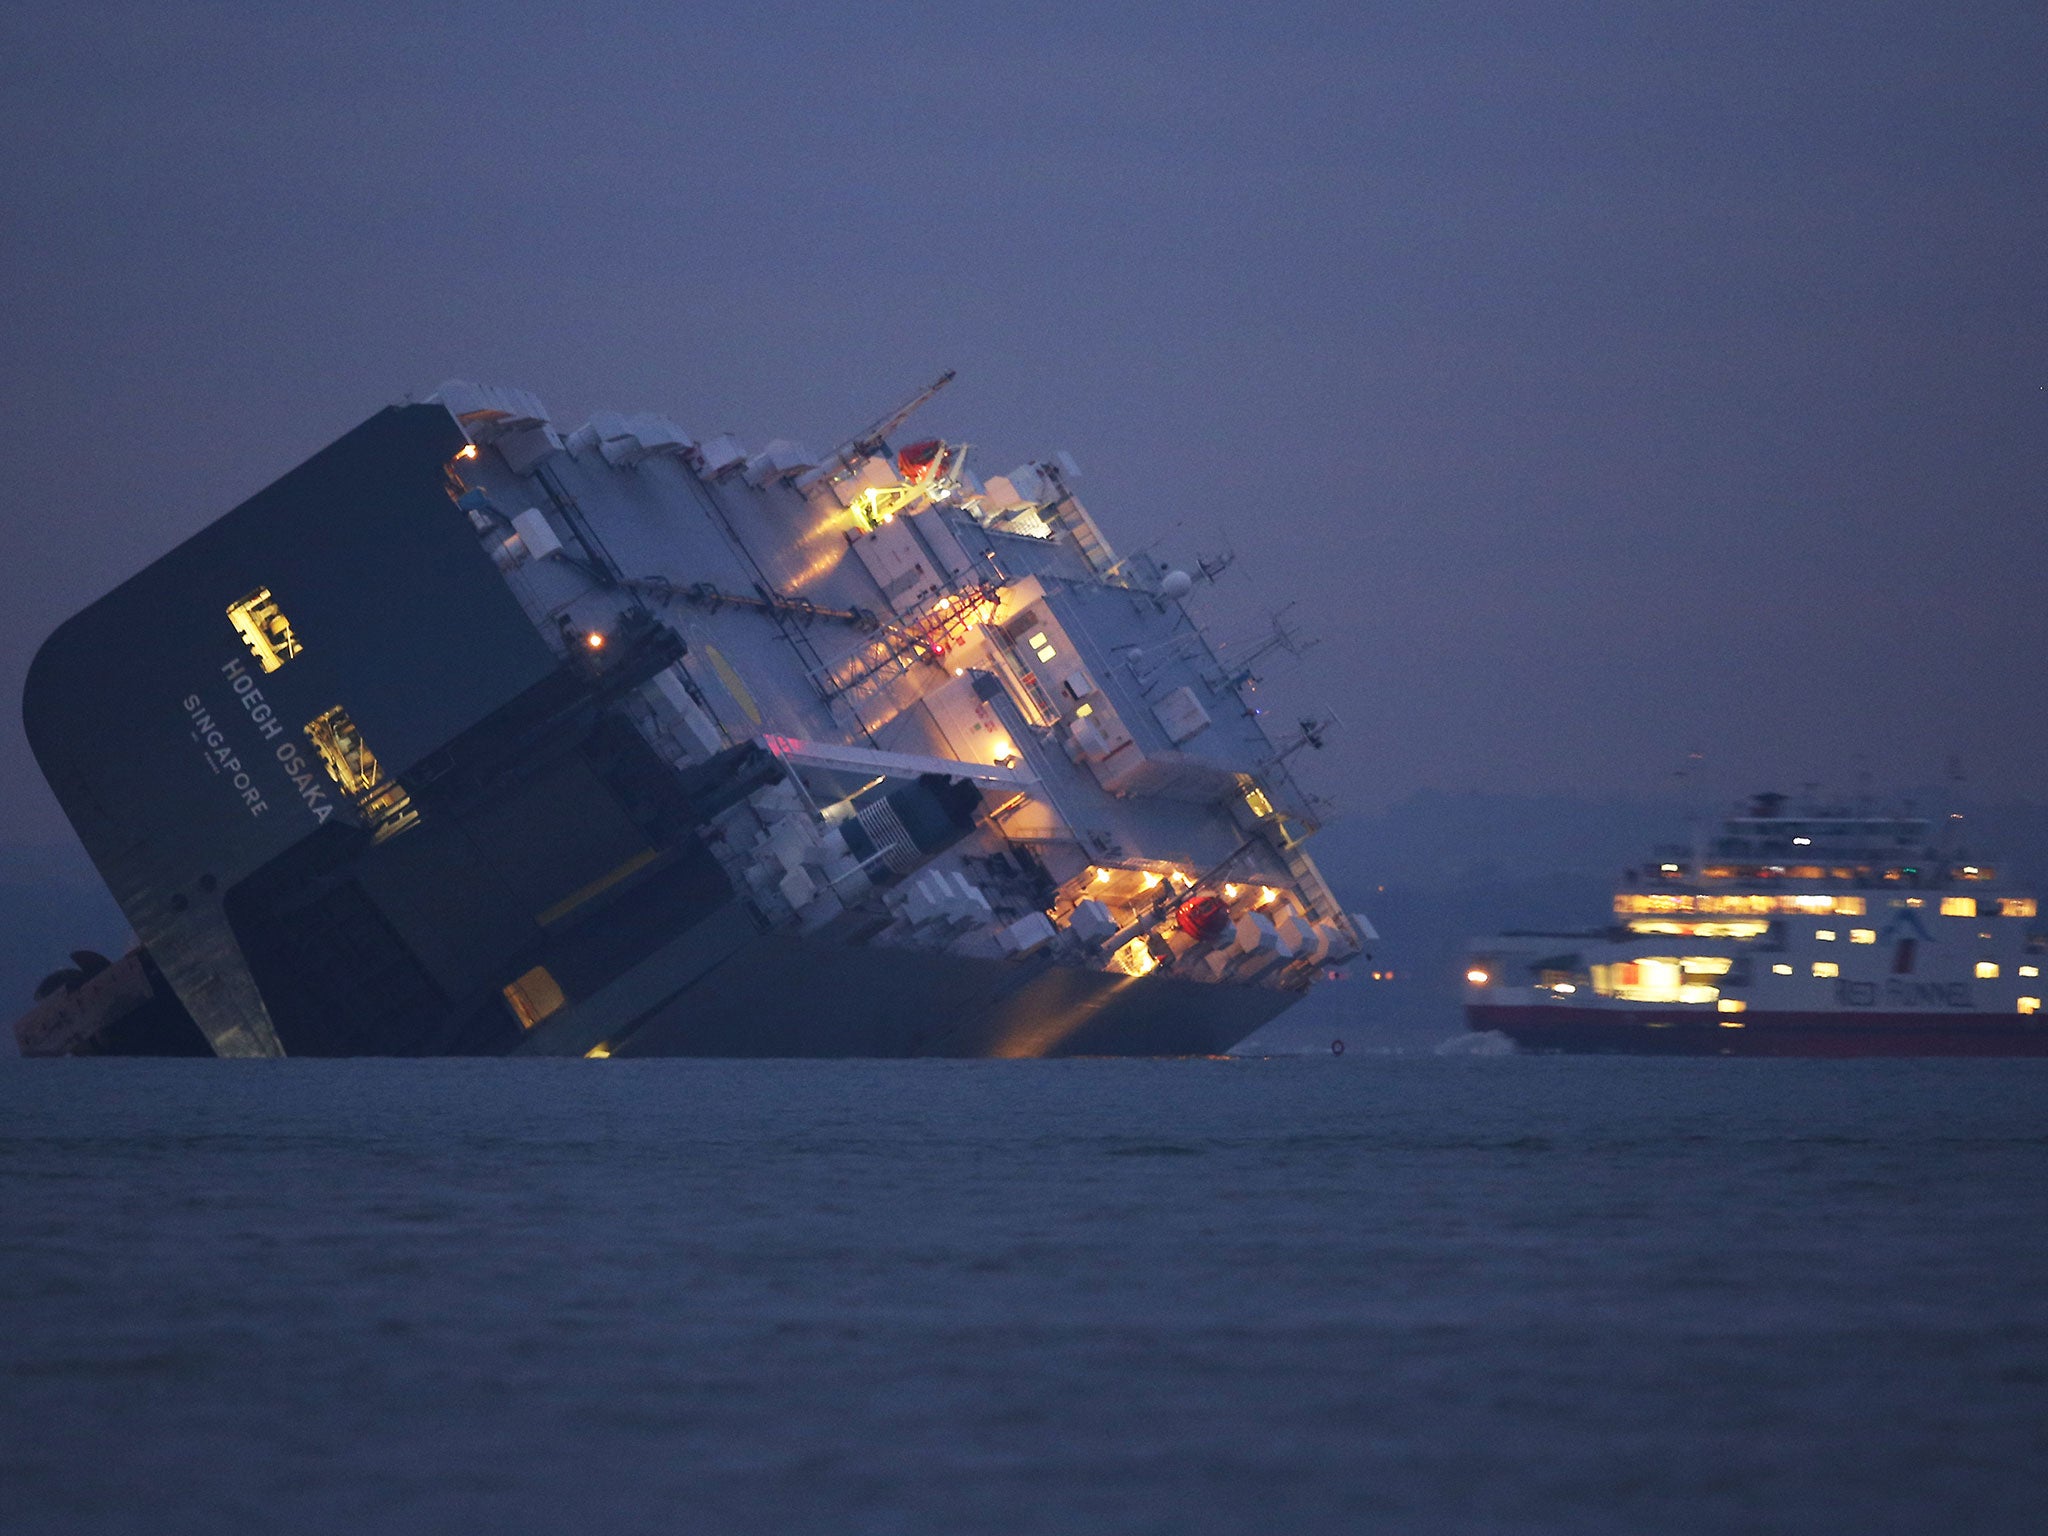 The ‘Hoegh Osaka’ cargo ship was deliberately run aground on a sand bank in the Solent